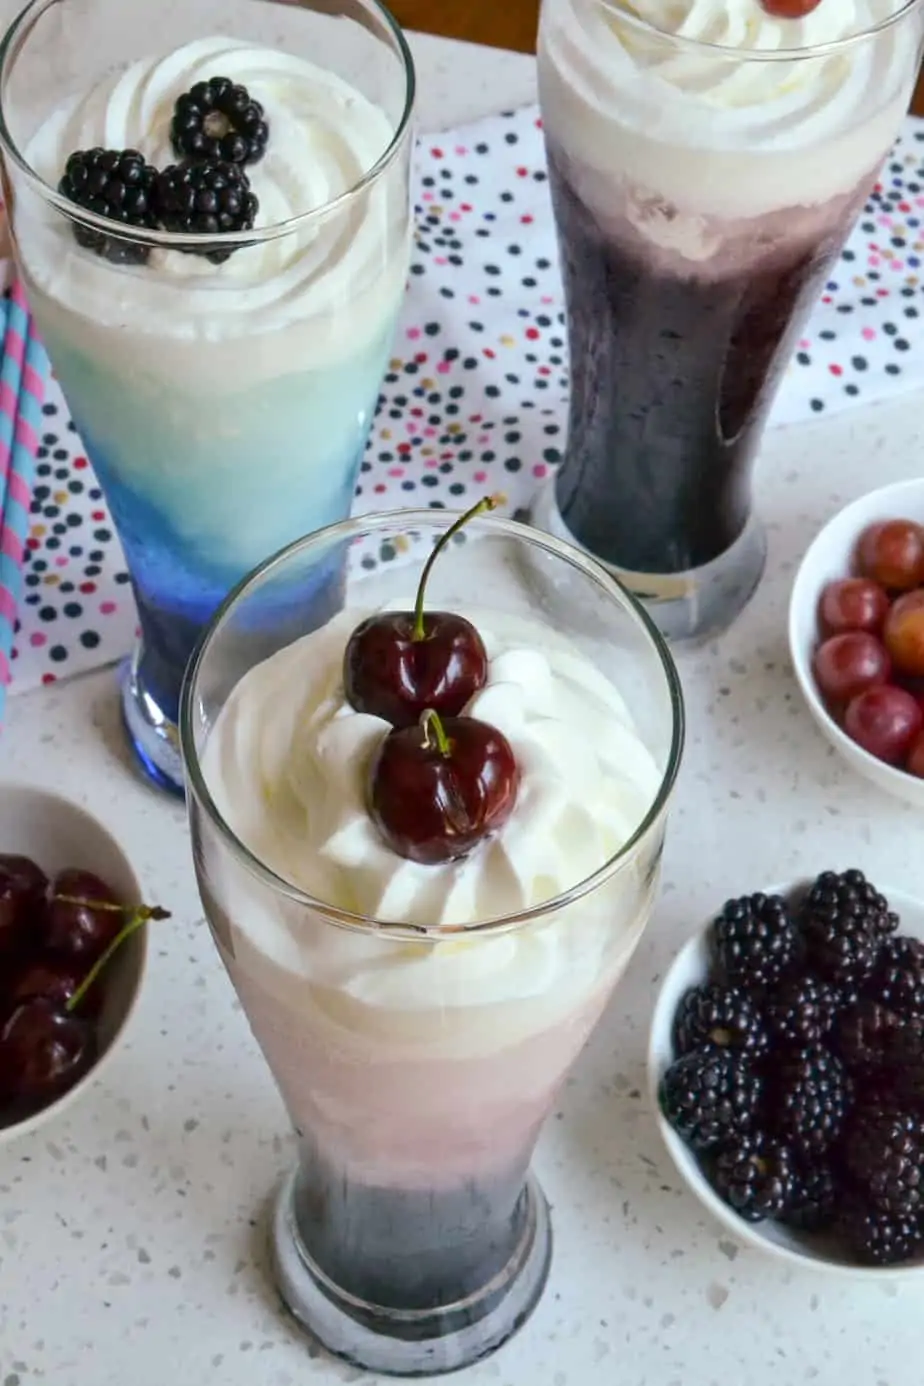 These super easy homemade Italian Cream Sodas are the perfect chilly sweet treat for those special celebrations like birthdays, anniversaries, and graduations.